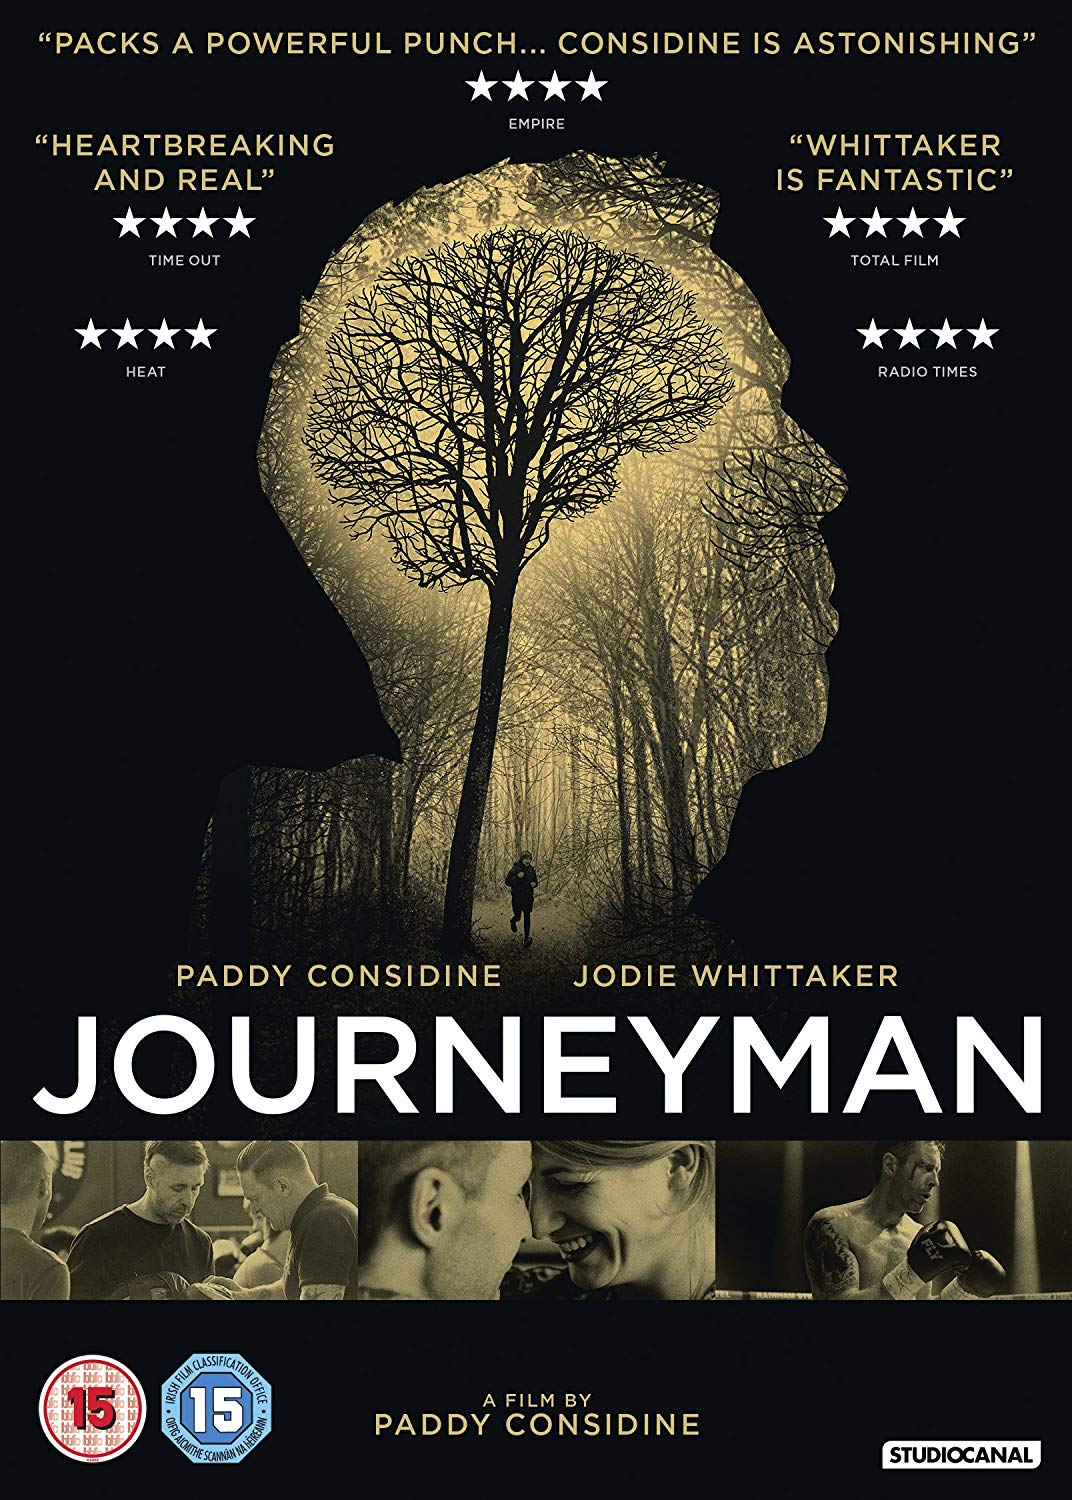 boom competitions - win Journeyman on DVD